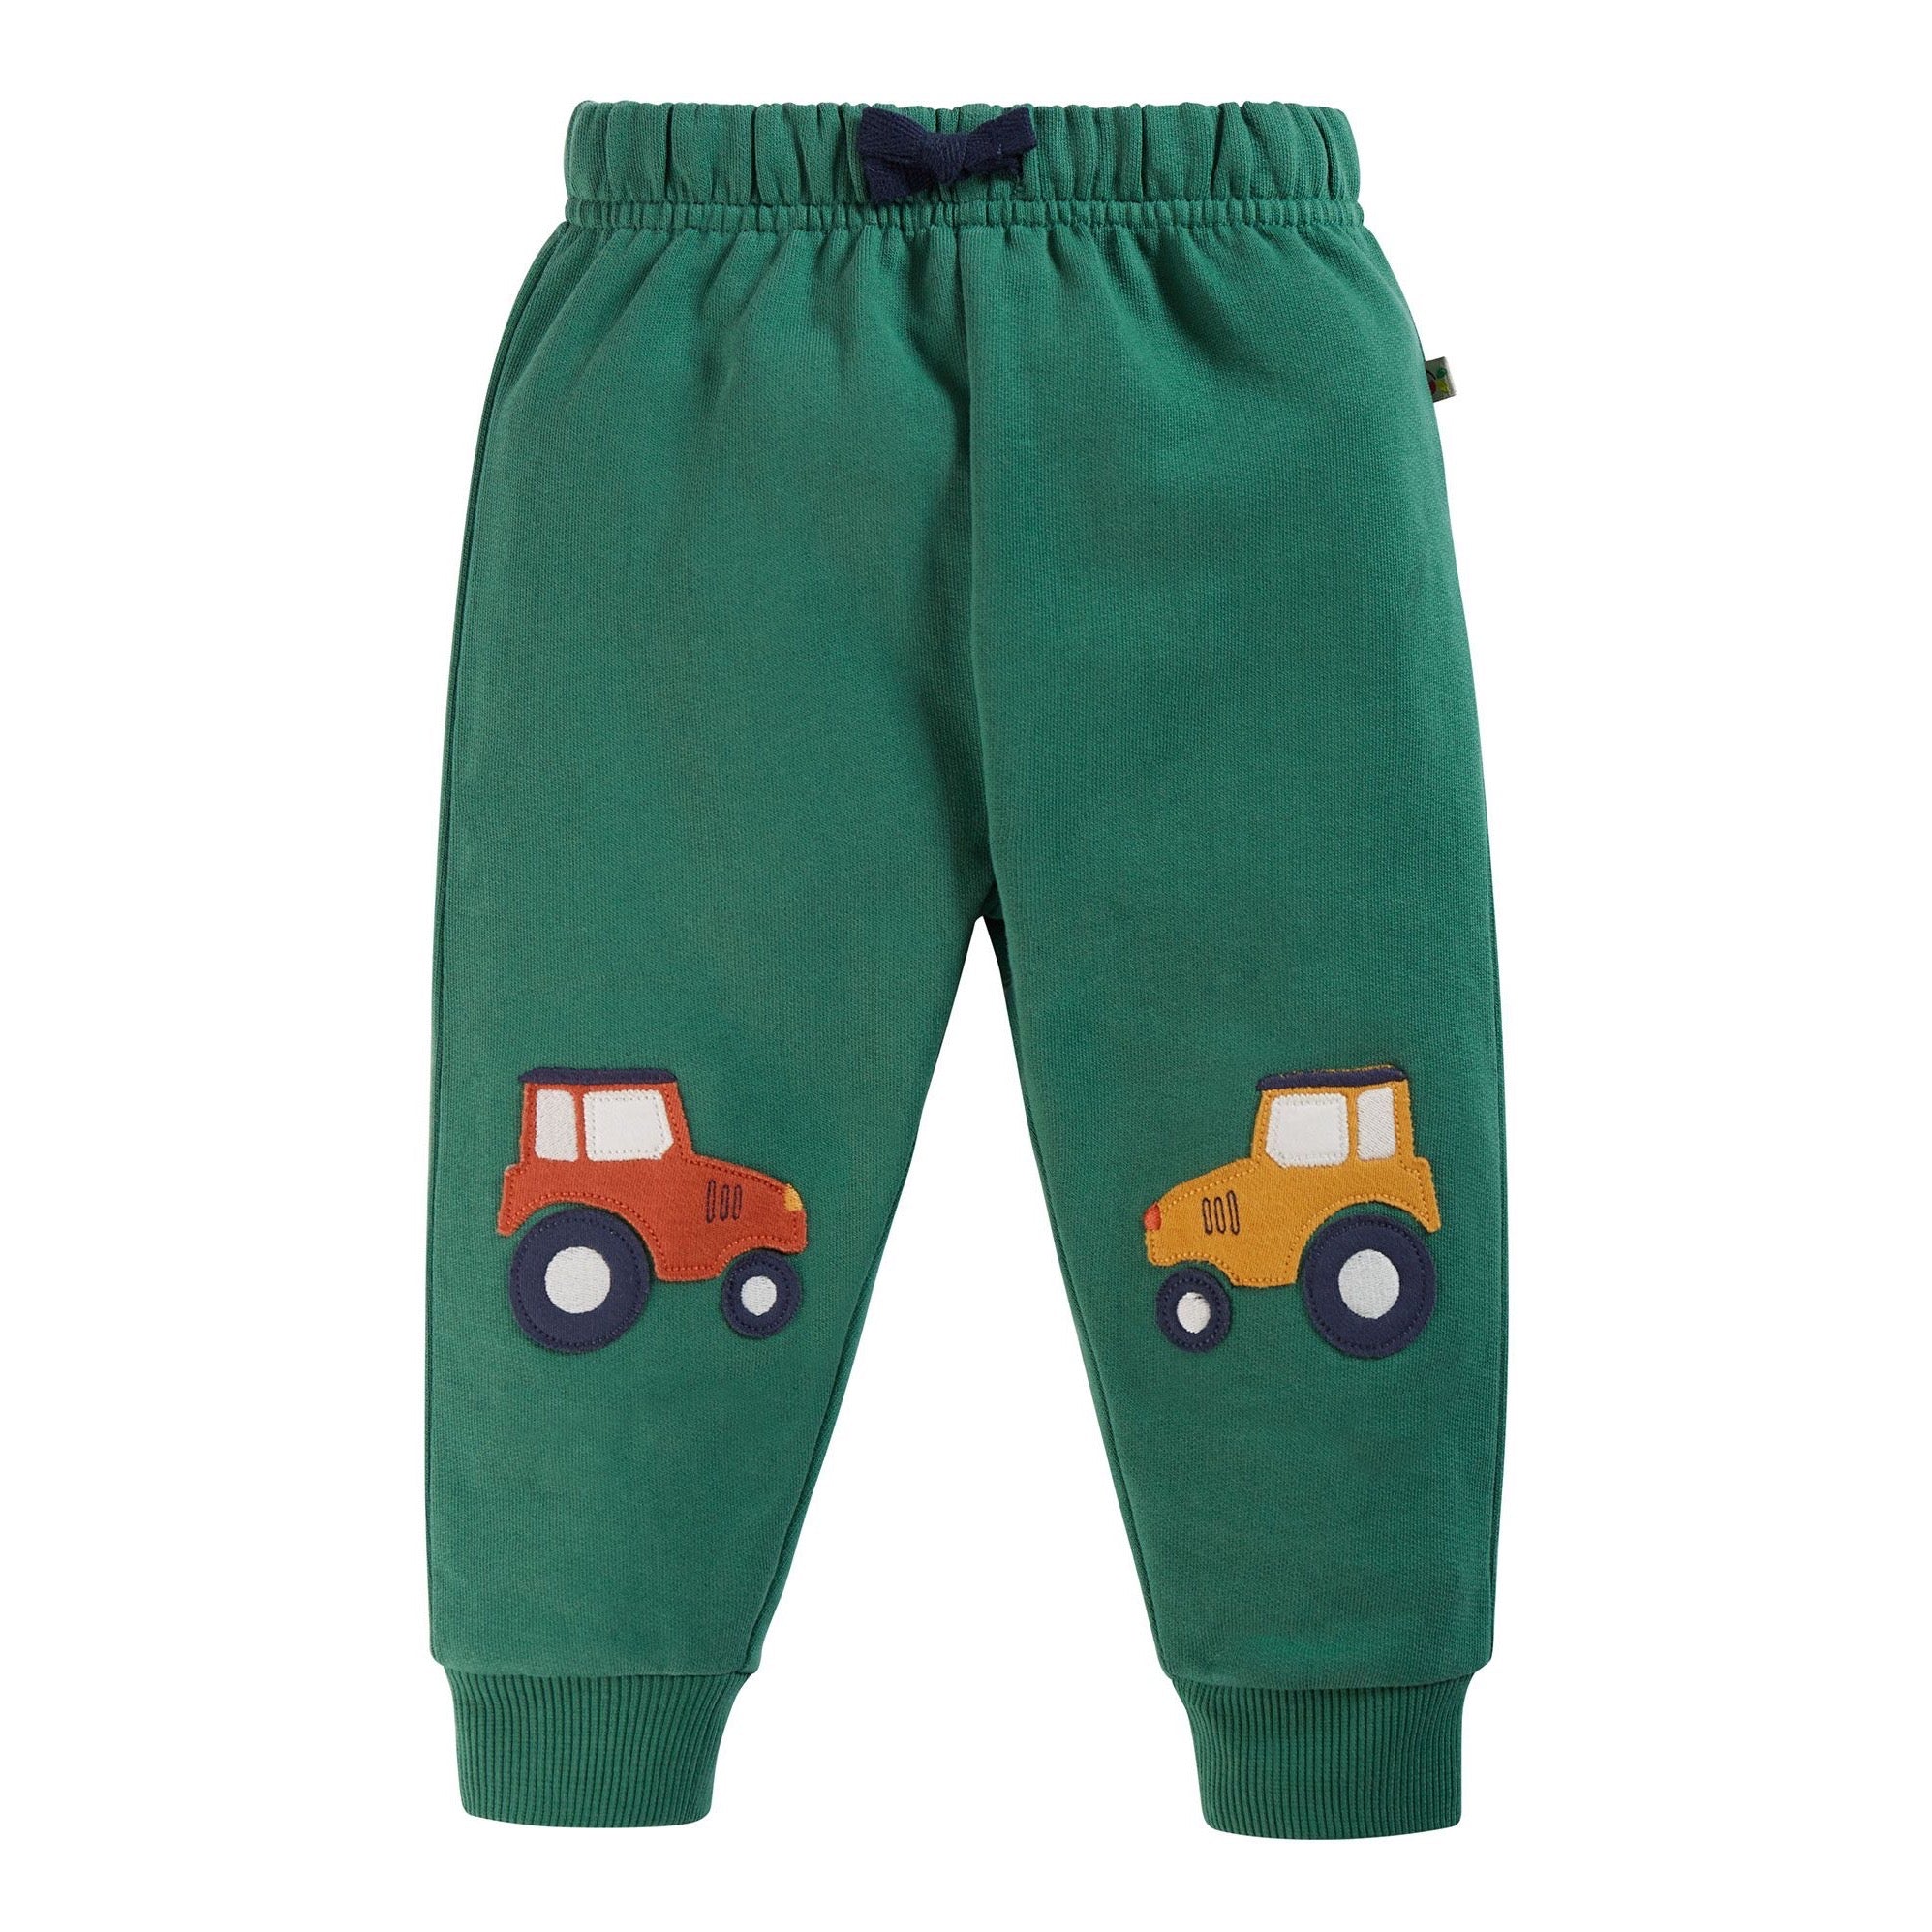 Frugi Character Infant Crawlers Green Tractors Clothing 0-3M / Green,3-6M / Green,6-9M / Green,9-12M / Green,12-18M / Green,18-24M / Green,2-3YRS / Green,3-4YRS / Green